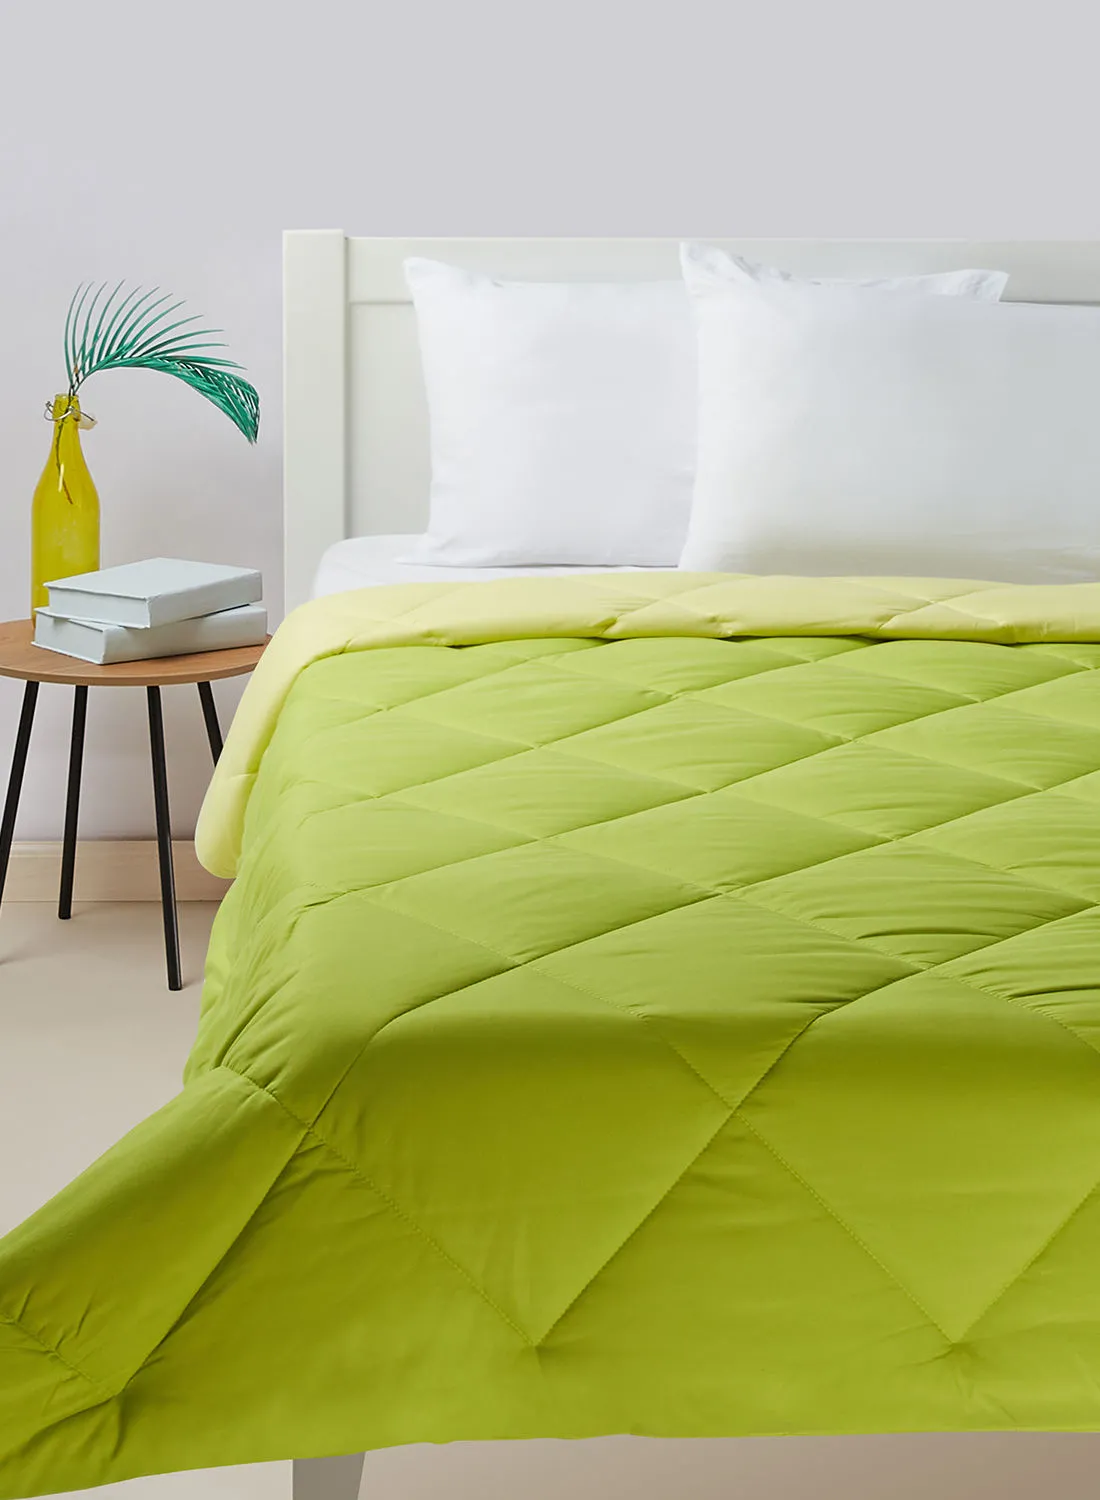 Amal Comforter Queen Size All Season Everyday Use Bedding Set Extra Soft Microfiber Single Piece Reversible Comforter   Green/Lime